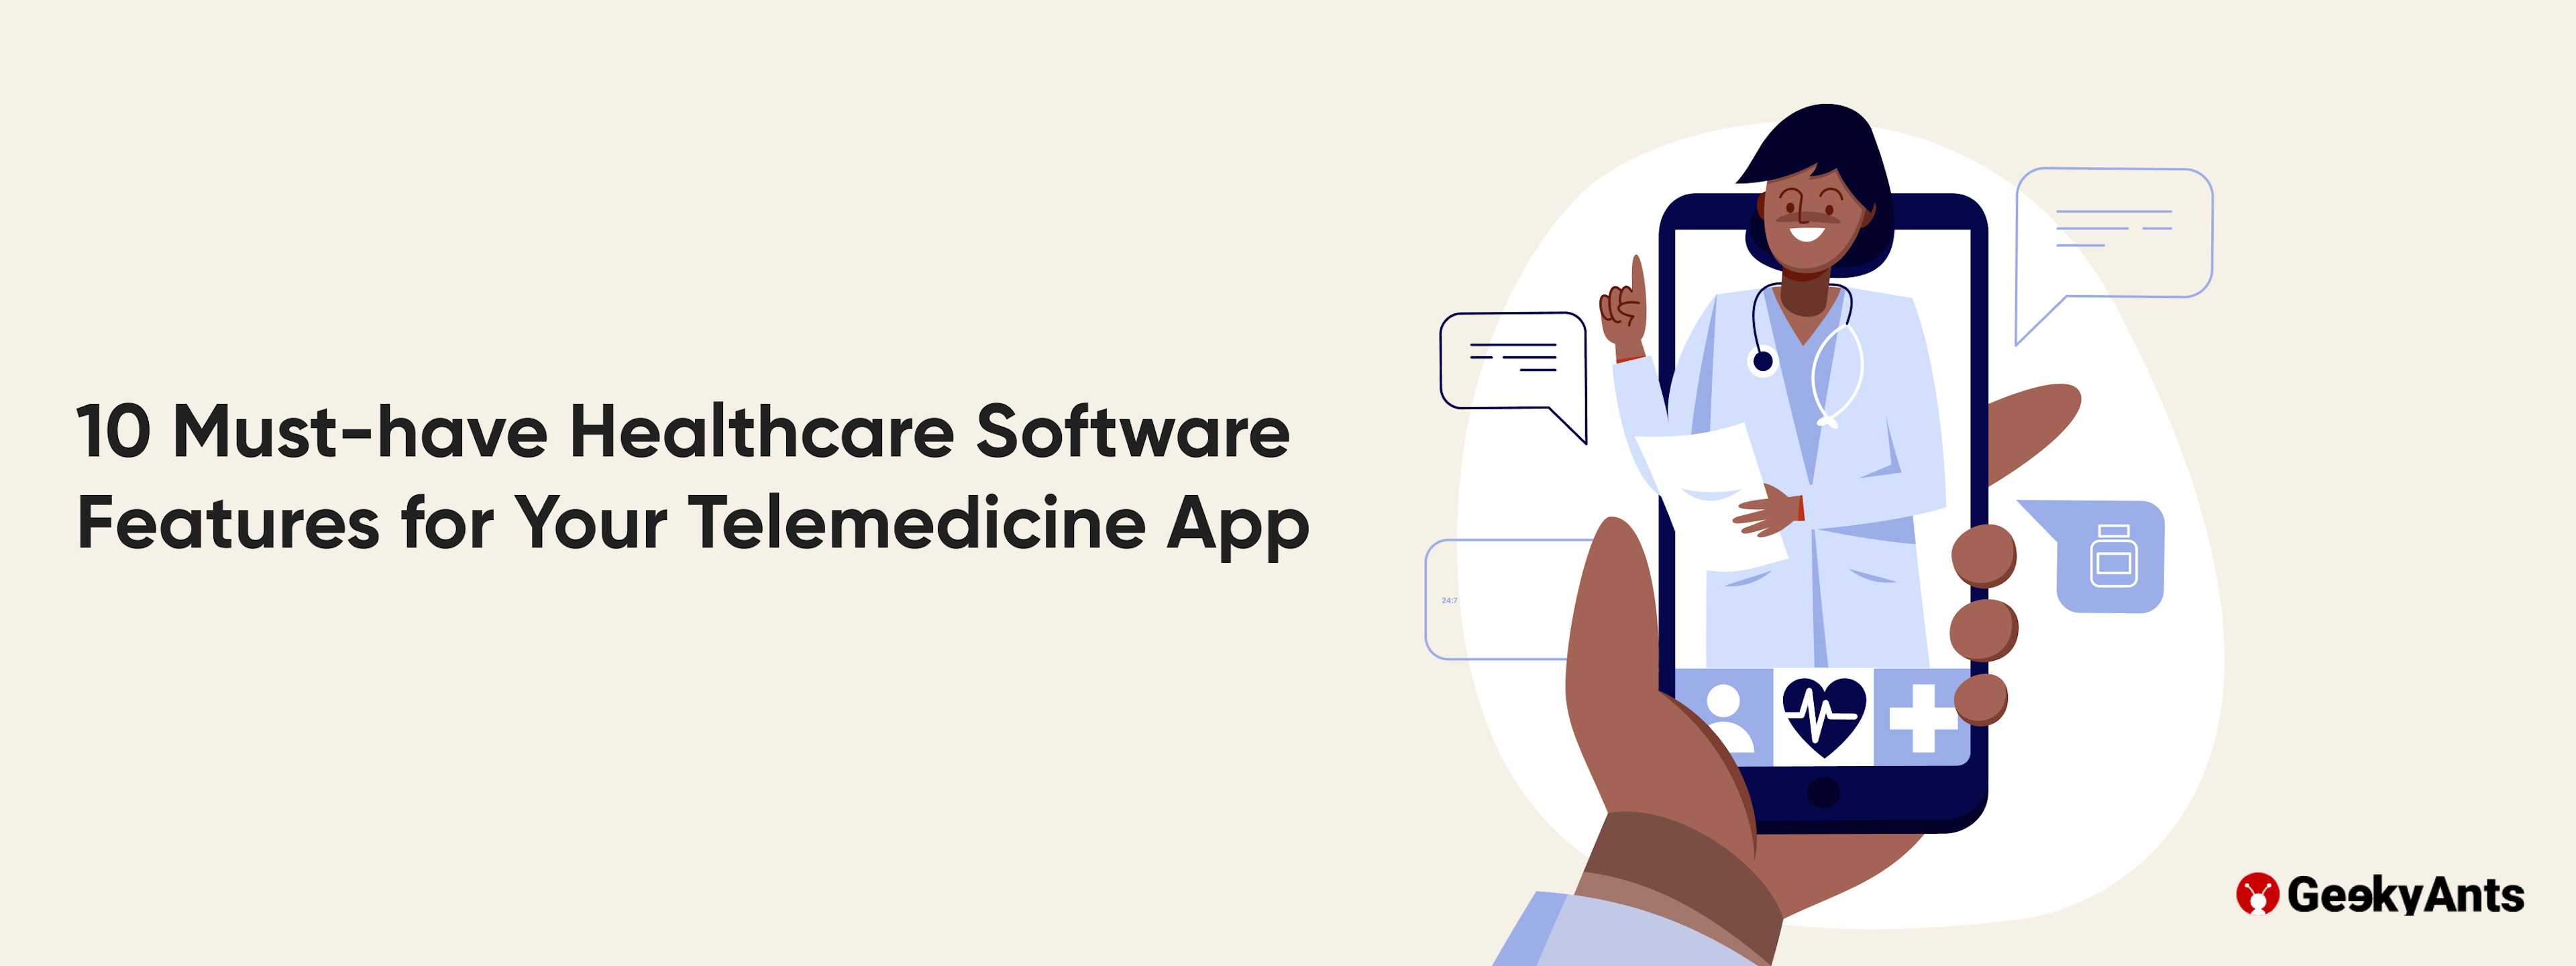 10 Must-have Healthcare Software Features for Your Telemedicine App